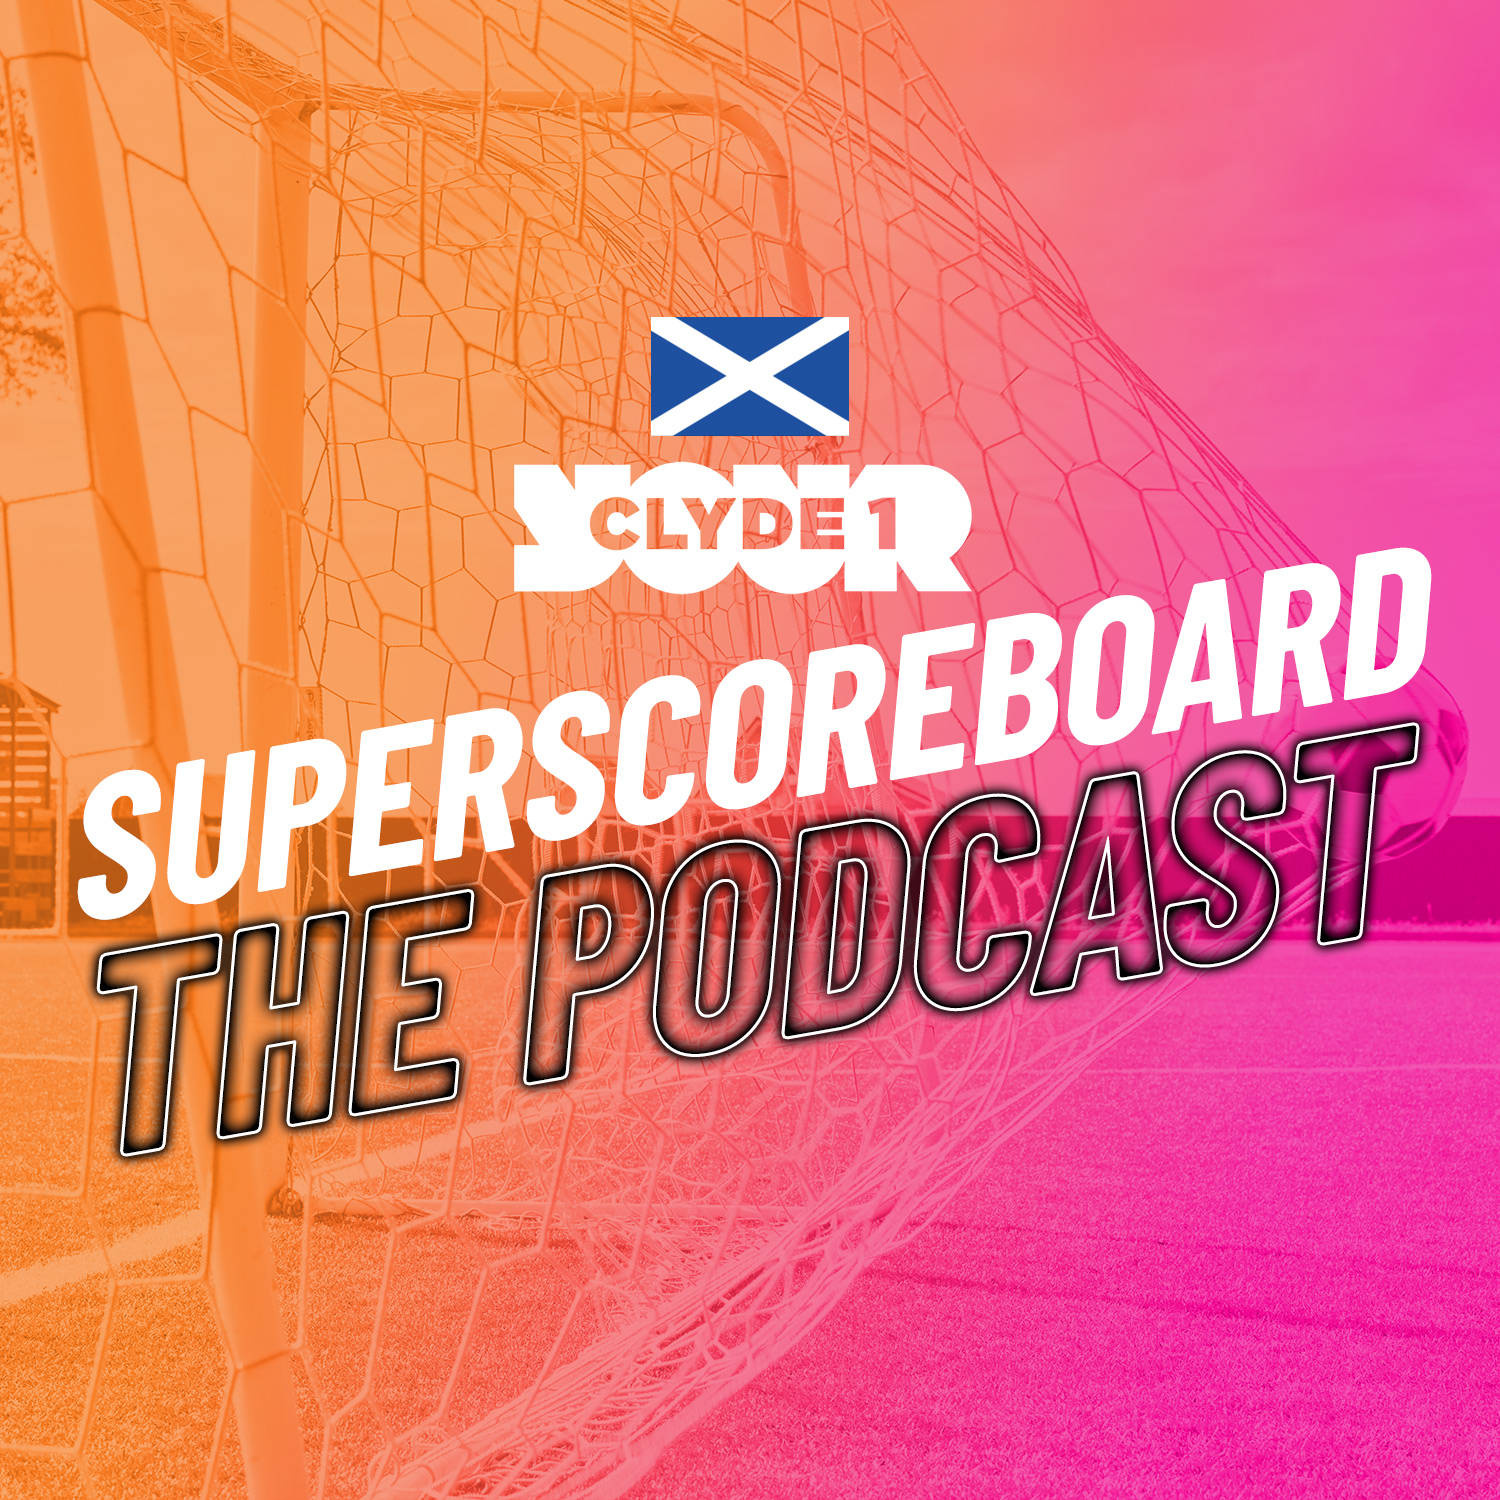 Friday 26th January Clyde 1 Superscoreboard